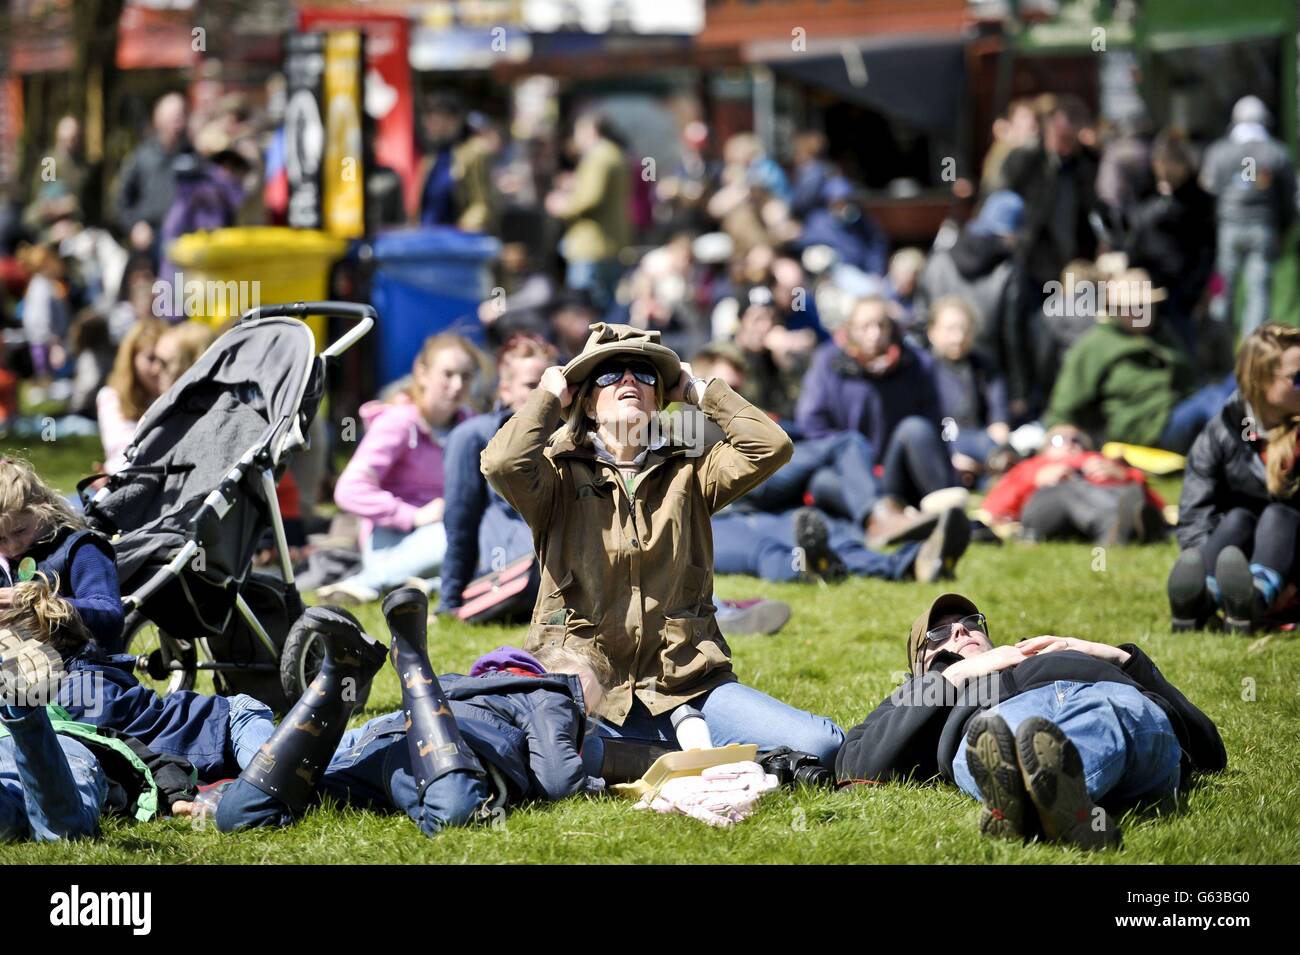 Crowds watch the dressage action on the big screen in sunny weather during day three of the Badminton Horse Trials in Badminton, Gloucestershire. Stock Photo